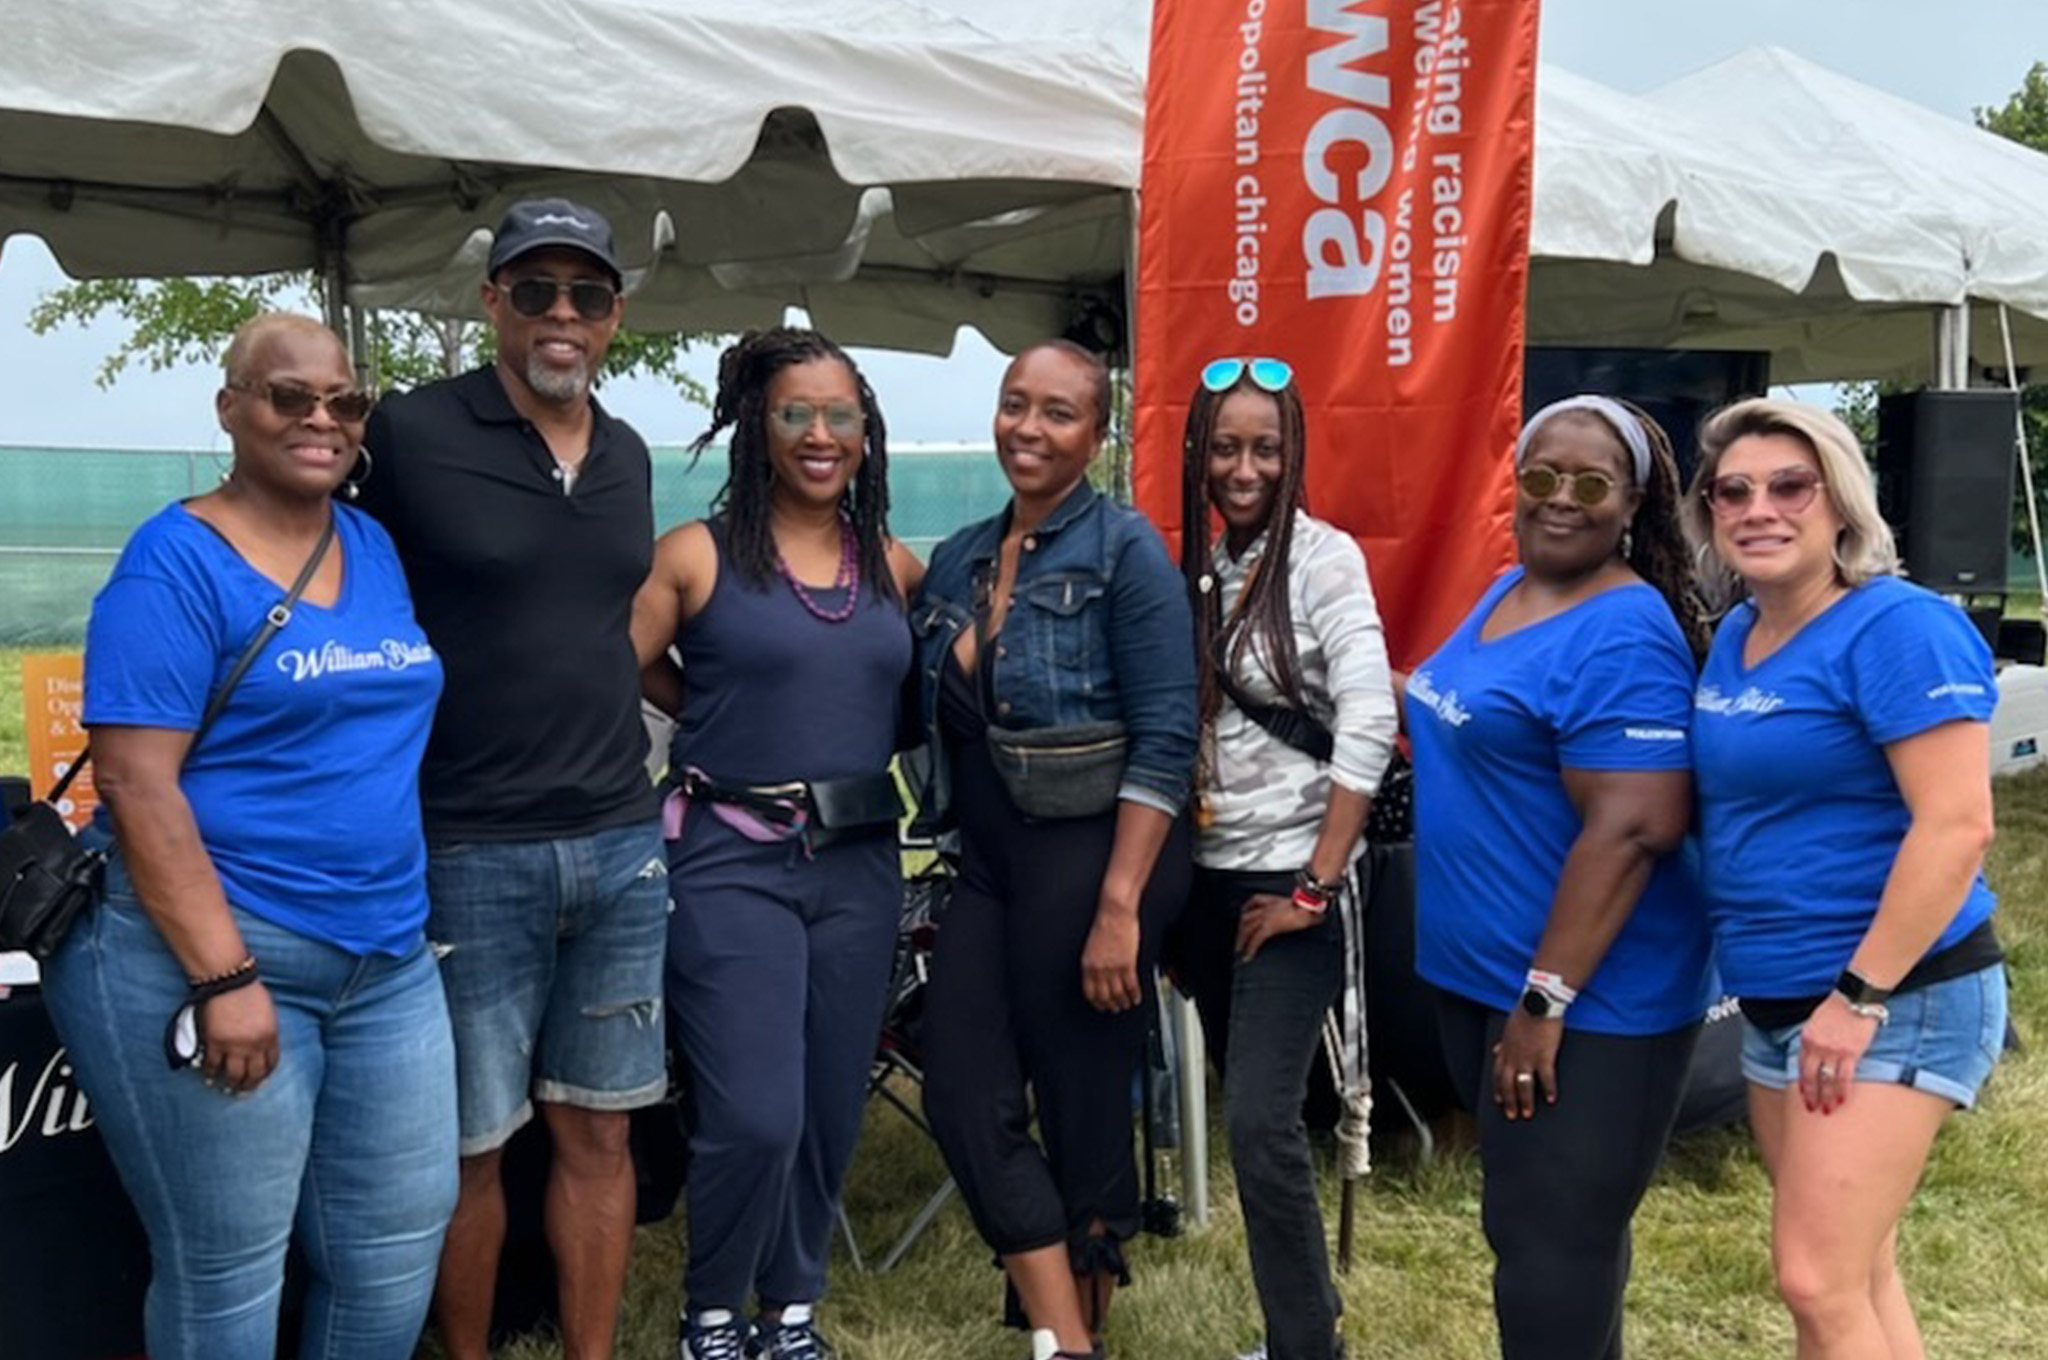 Attending the Silver Room Block Party are (from left) YWCA colleagues and ambassadors Stefanie Porter, Robert Johnson (general counsel), Nicole Robinson (chief executive officer), Beverly Phillips, Anita Annafi, and William Blair colleagues Toya Garcia-Bradow and Carla Ramirez.